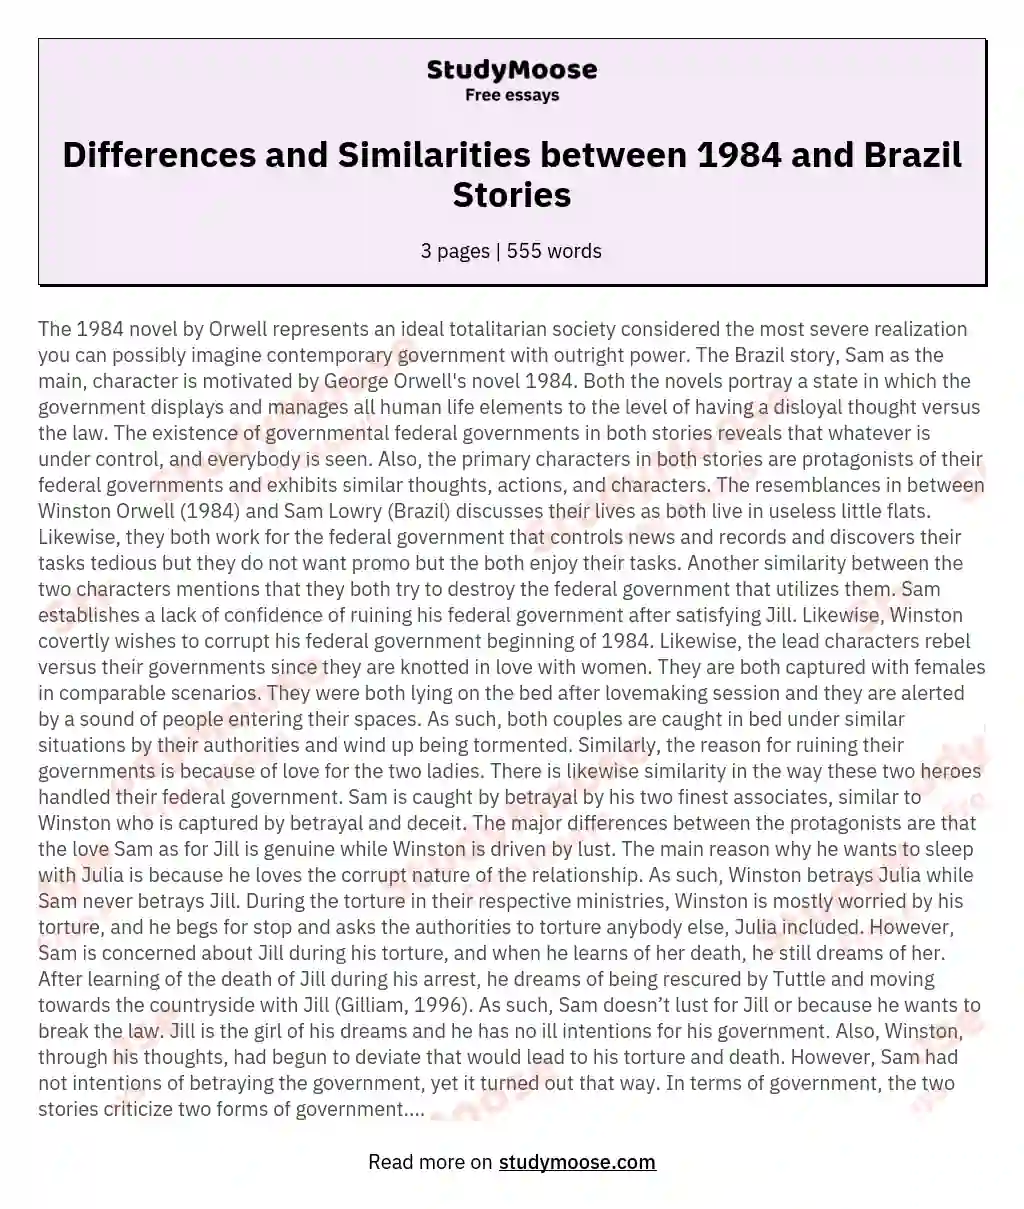 Differences and Similarities between 1984 and Brazil Stories